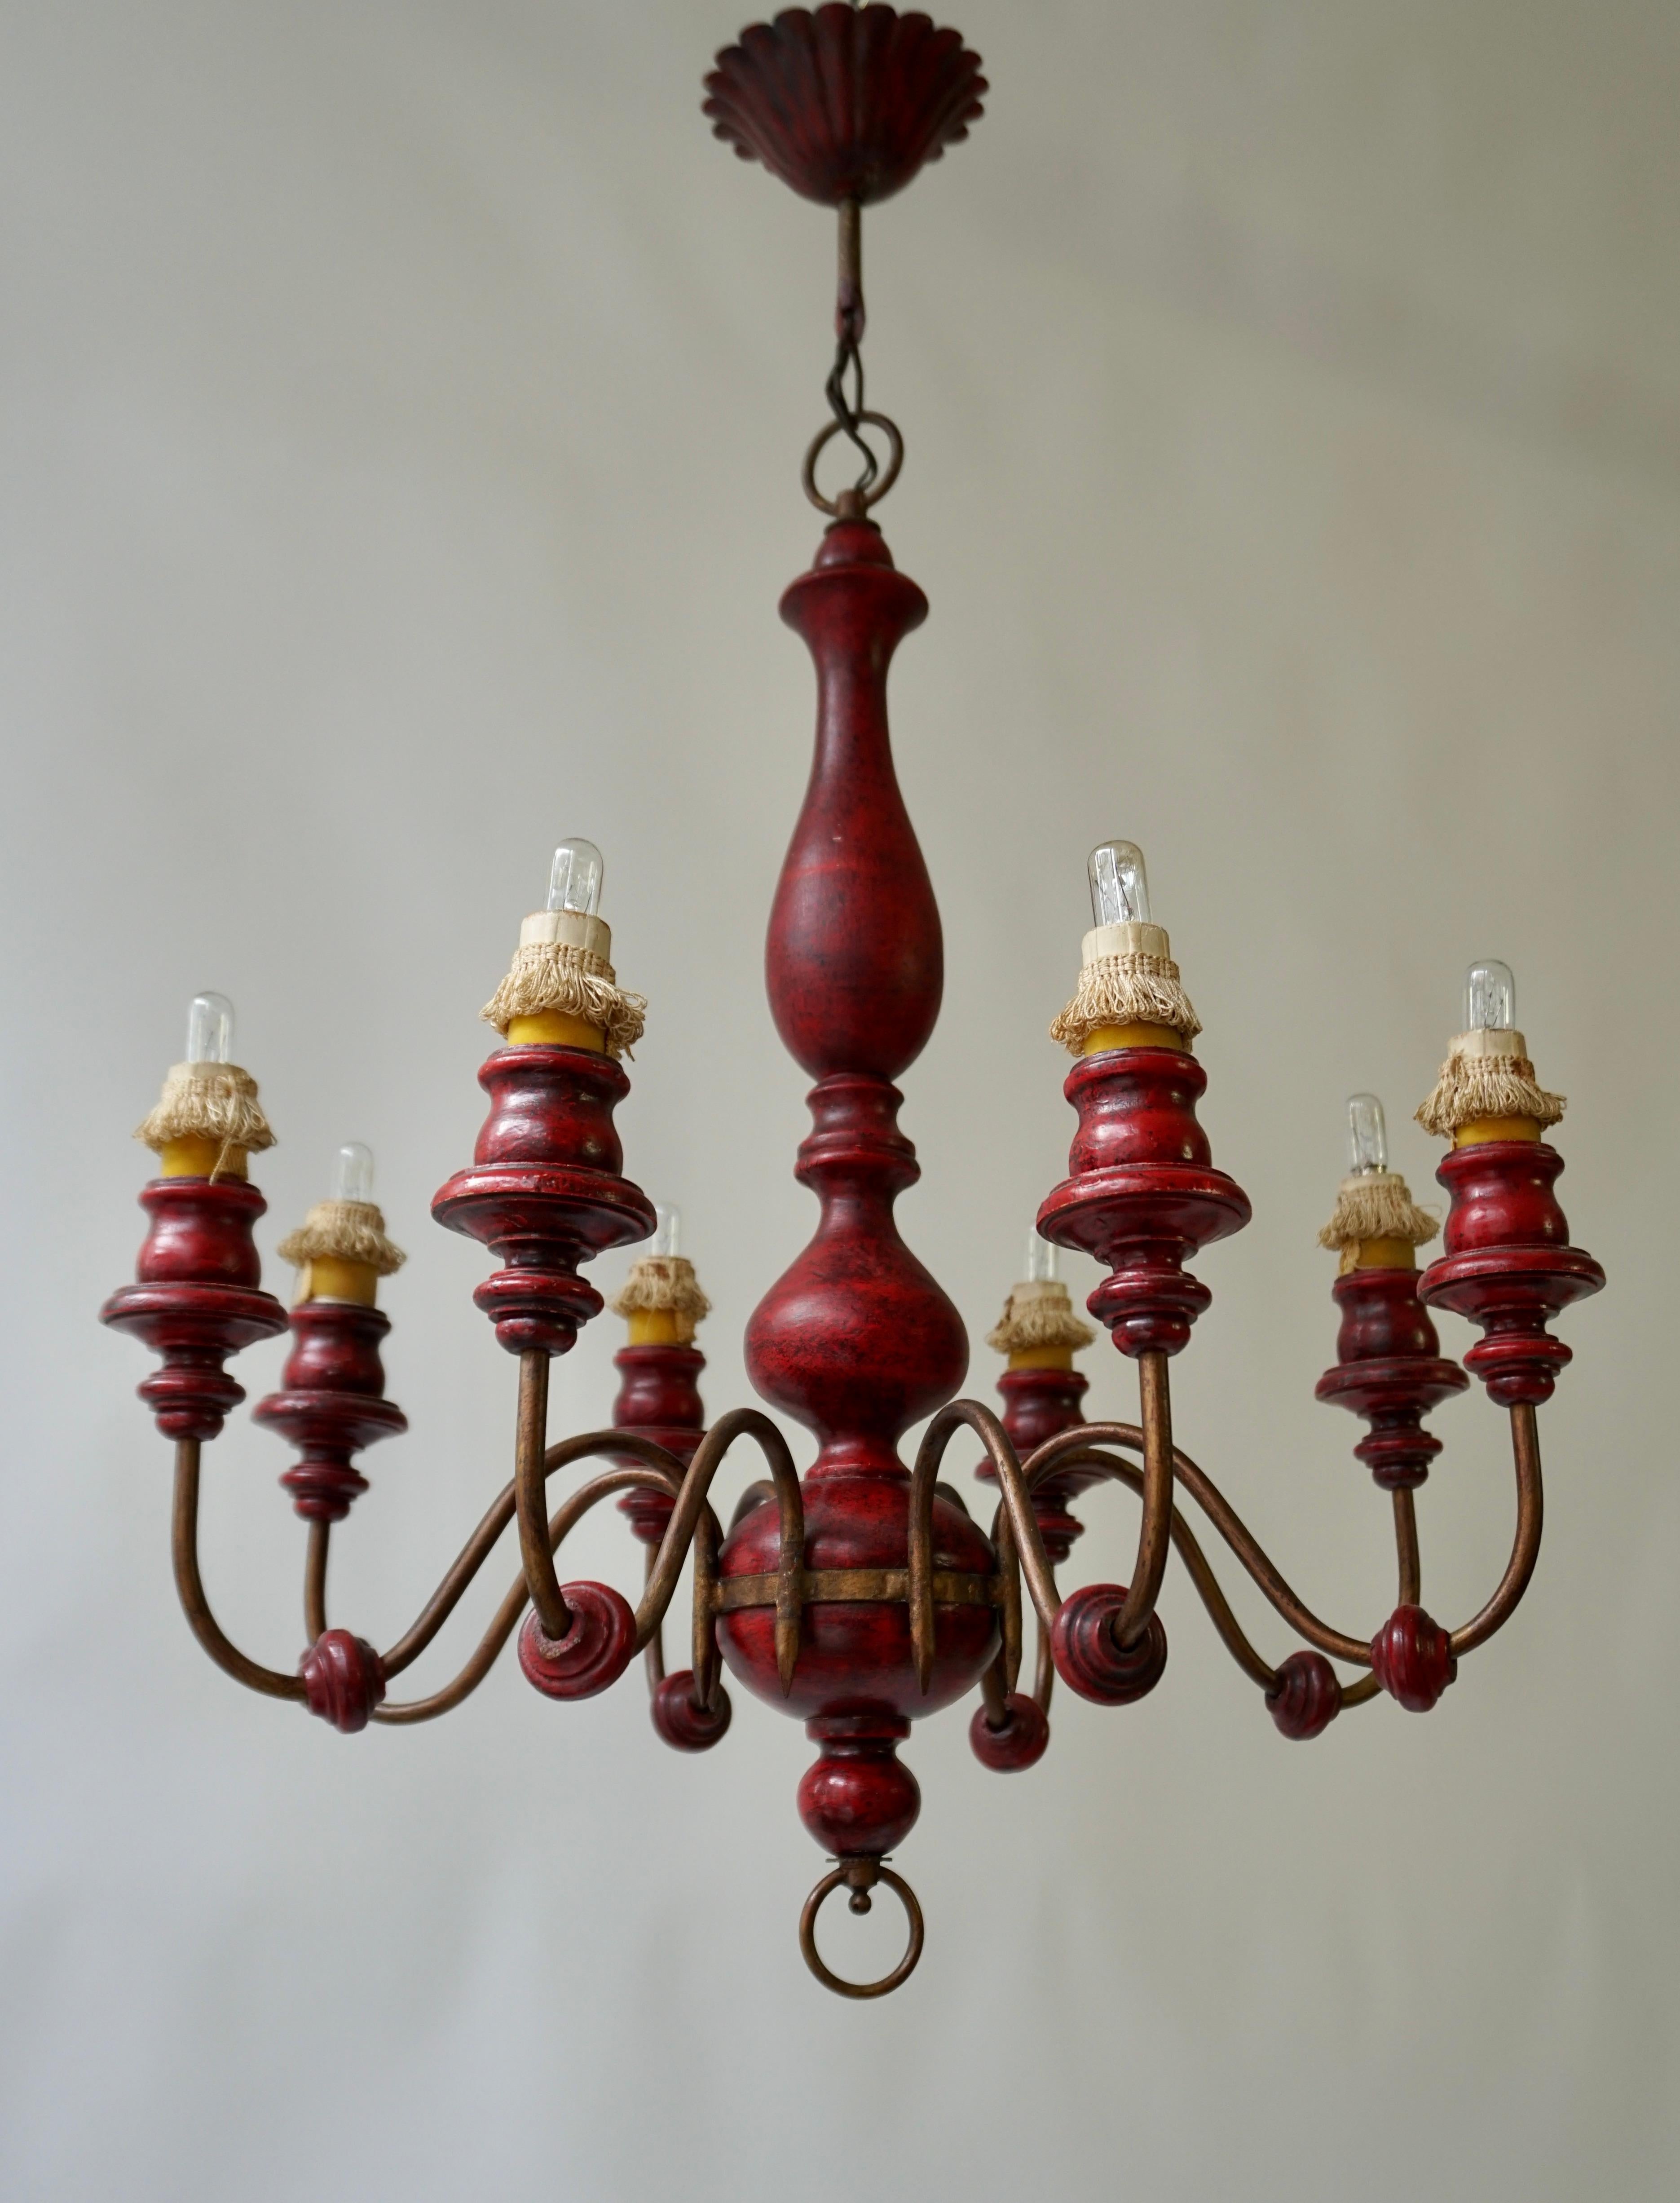 Handsome Italian reddish painted wooden chandelier with eight metal arms.

Diameter 53 cm.
Height fixture 62 cm.
Total height 75 cm.

The light requires eight single E14 screw fit lightbulbs (40Watt max.) LED compatible.
